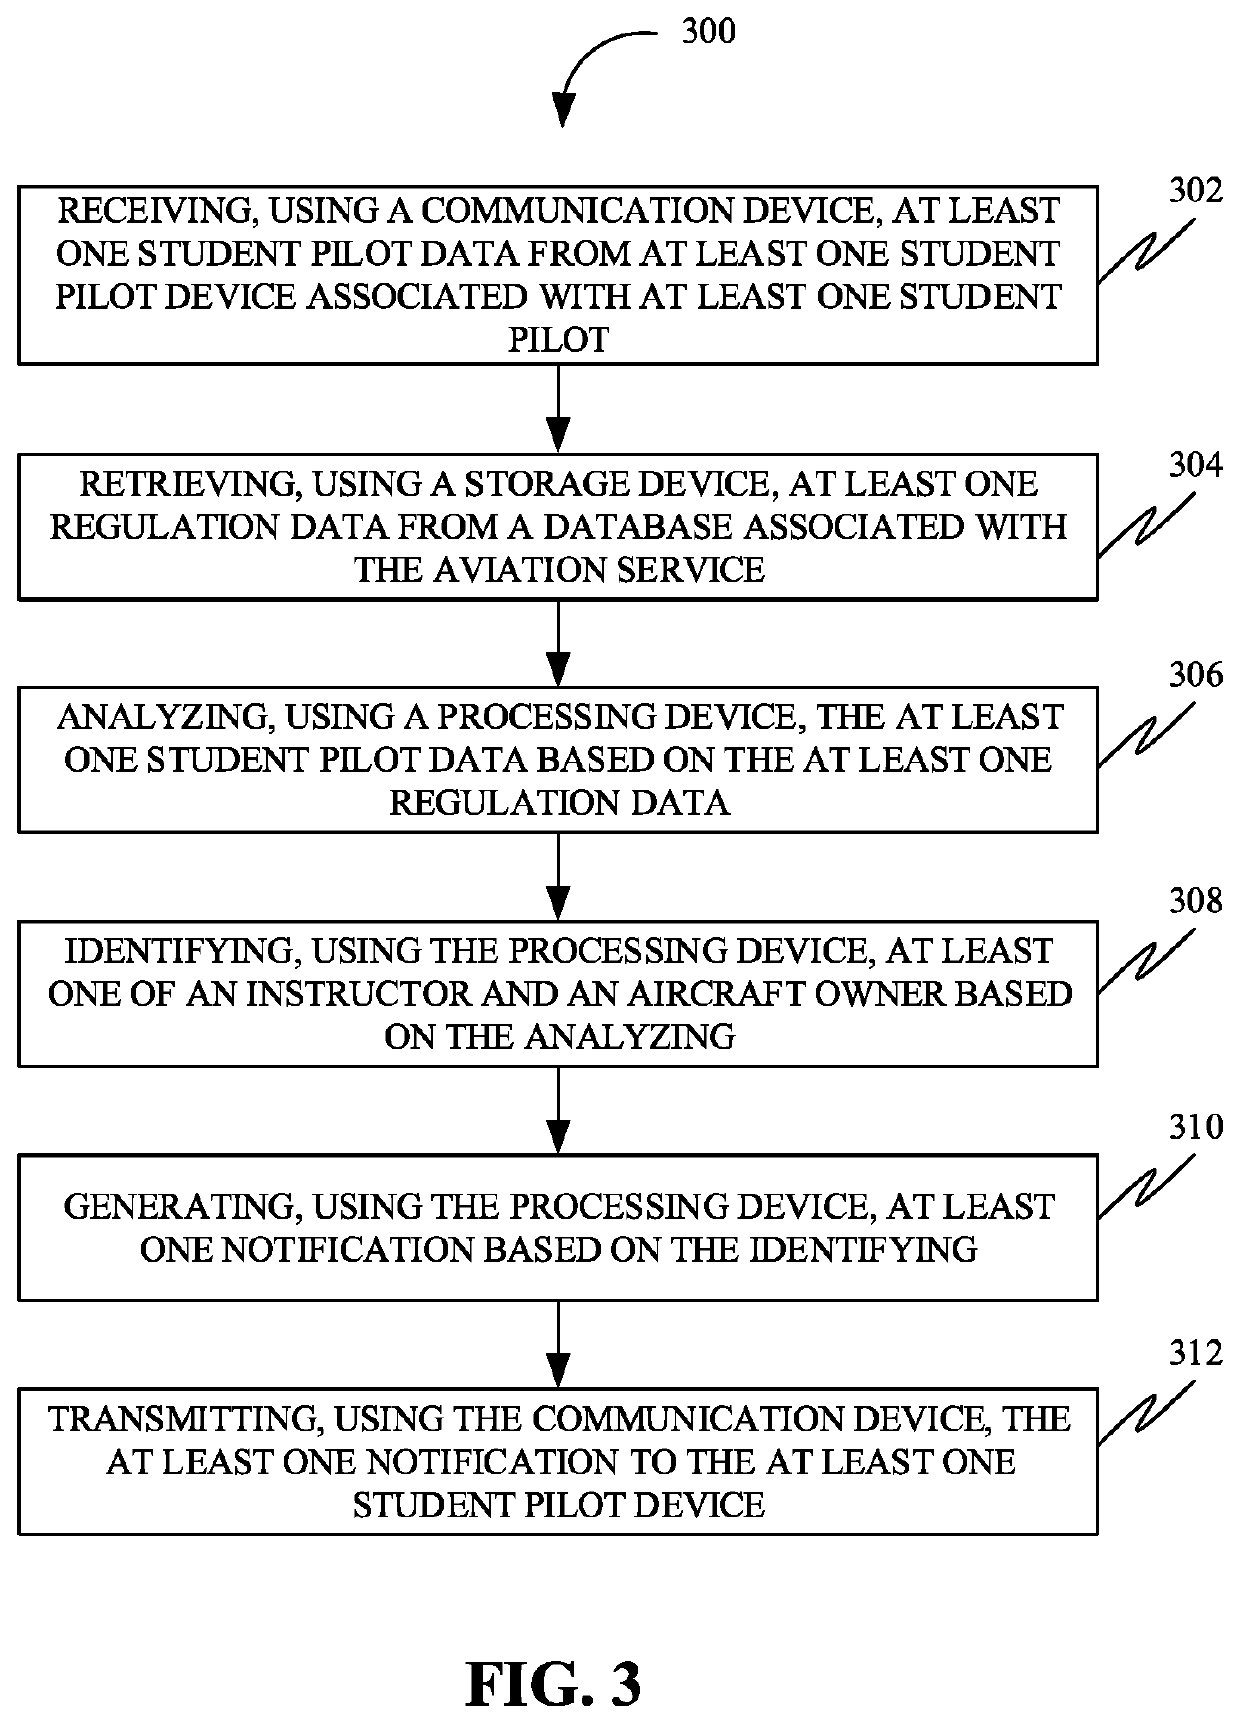 Methods and systems of facilitating management of an aviation service for a student pilot